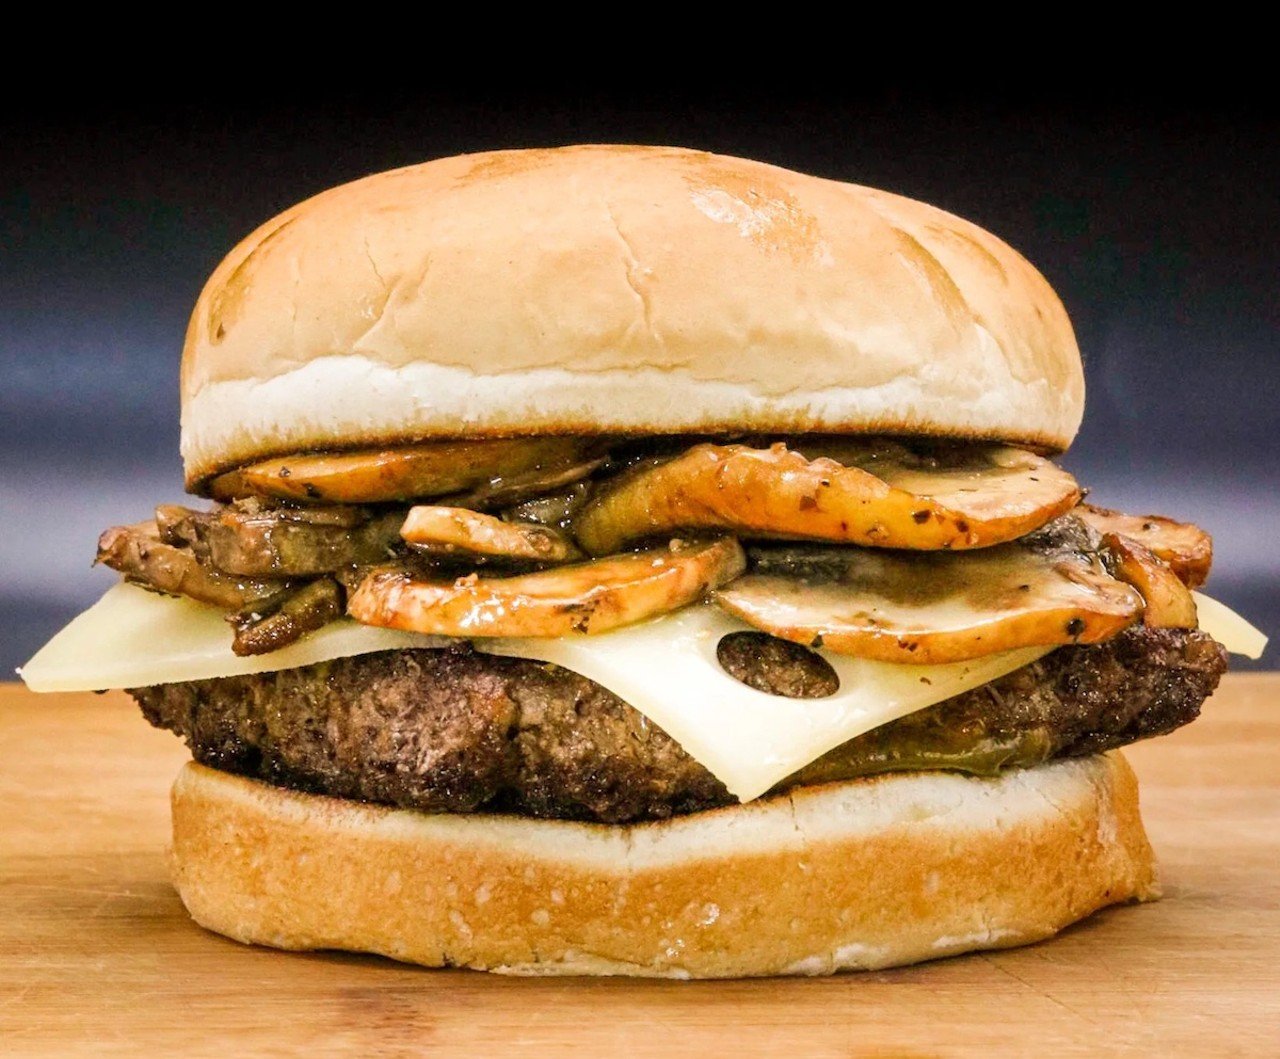 Tickle Pickle: Nom Petty
4176 Hamilton Ave., Northside; 915 N. Ft. Thomas Ave., Ft. Thomas
Who it’s named after: Rock musician Tom Petty
The burger: Swiss cheese, mayo and sauteed mushrooms on a golden hamburger bun.